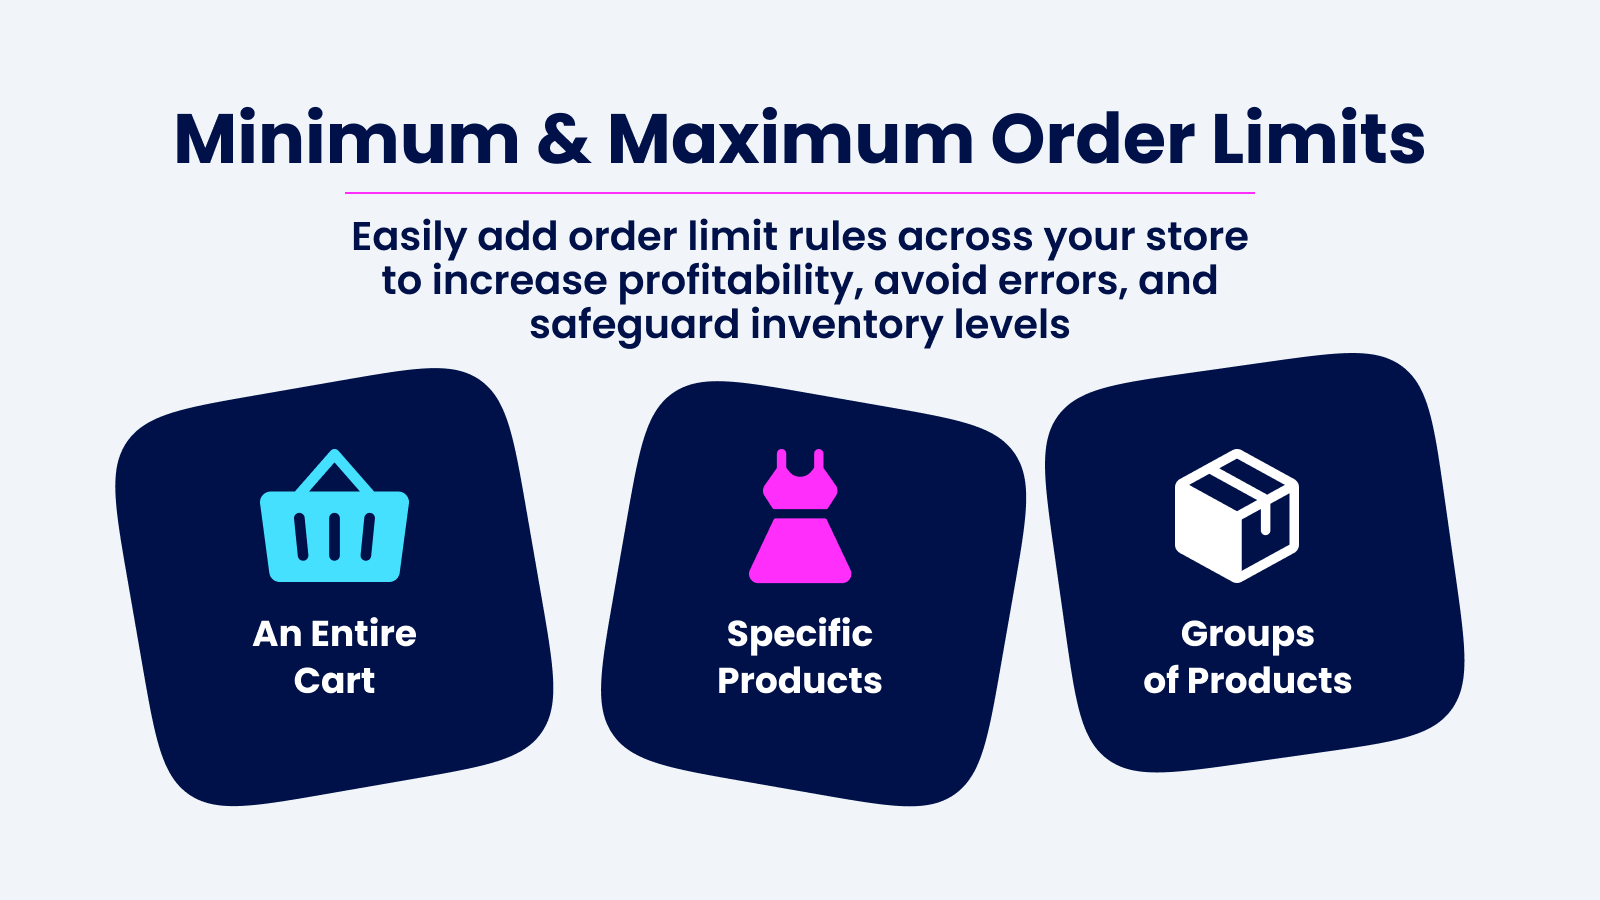 Add order limits on an entire cart, specific products & groups